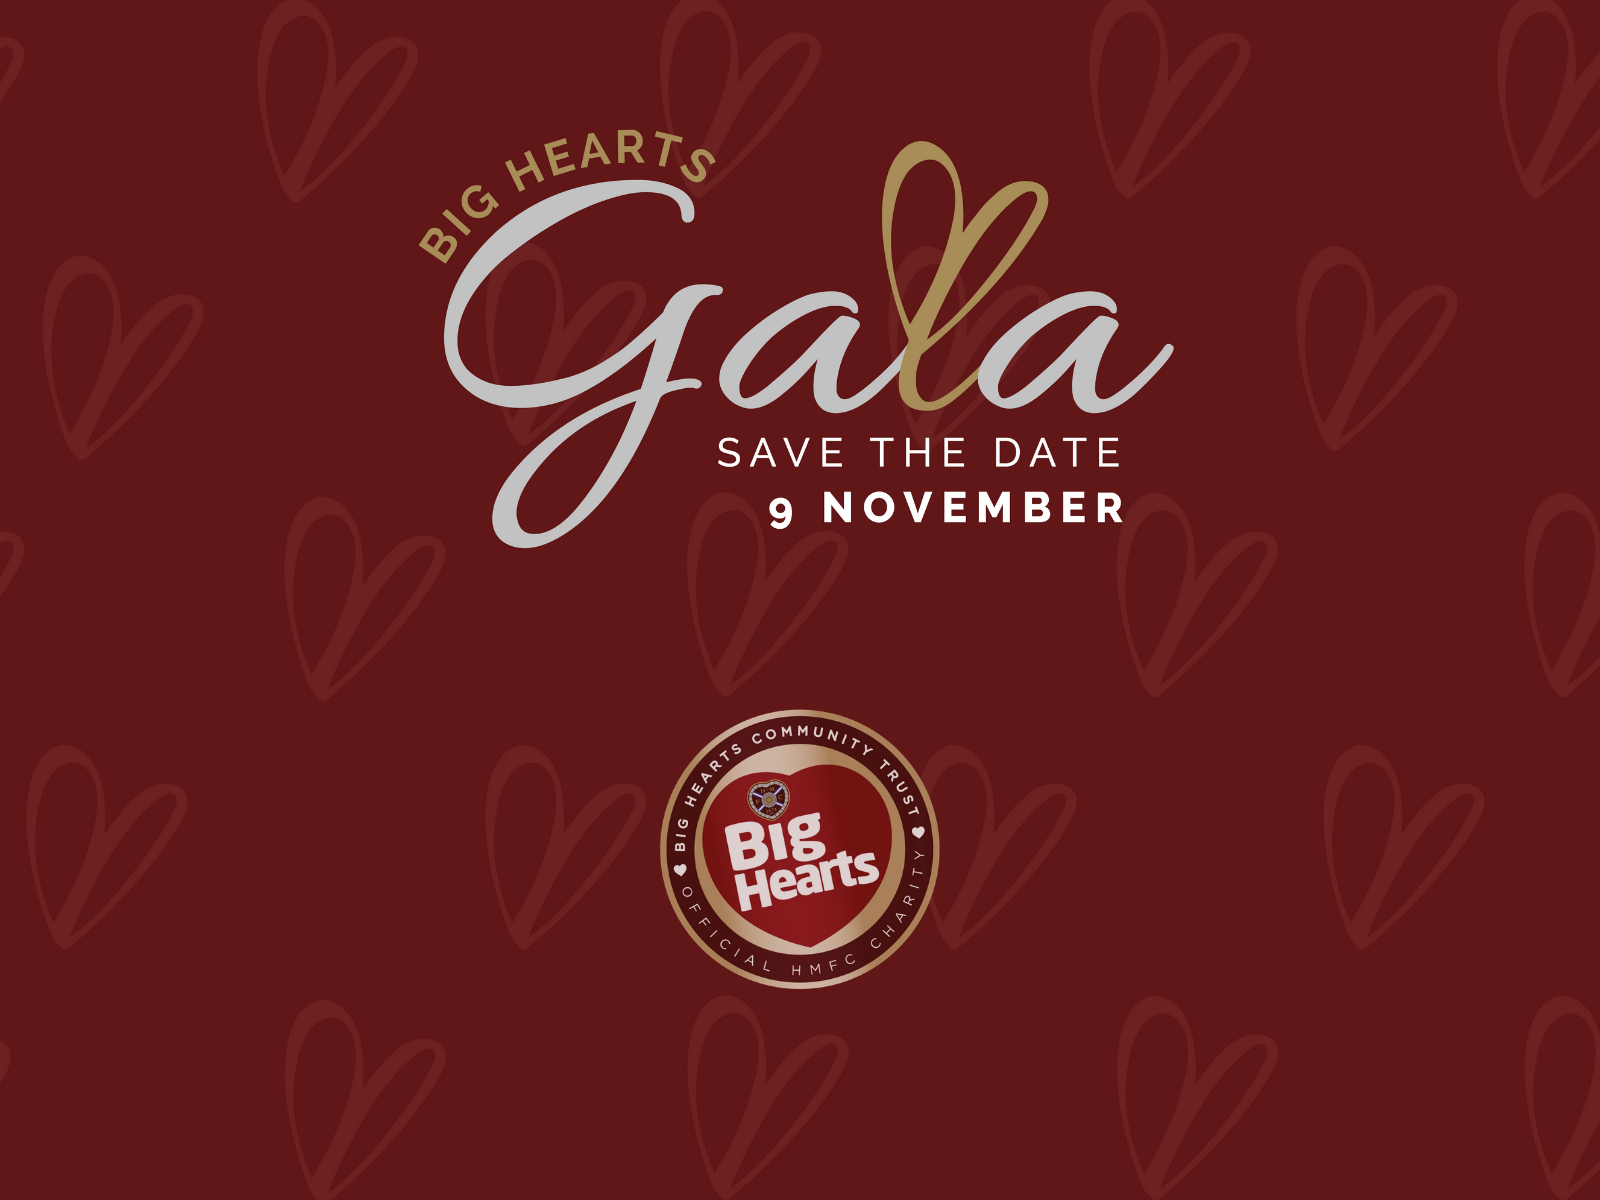  » Our 1st Big Hearts Gala announced for Saturday 9th November!